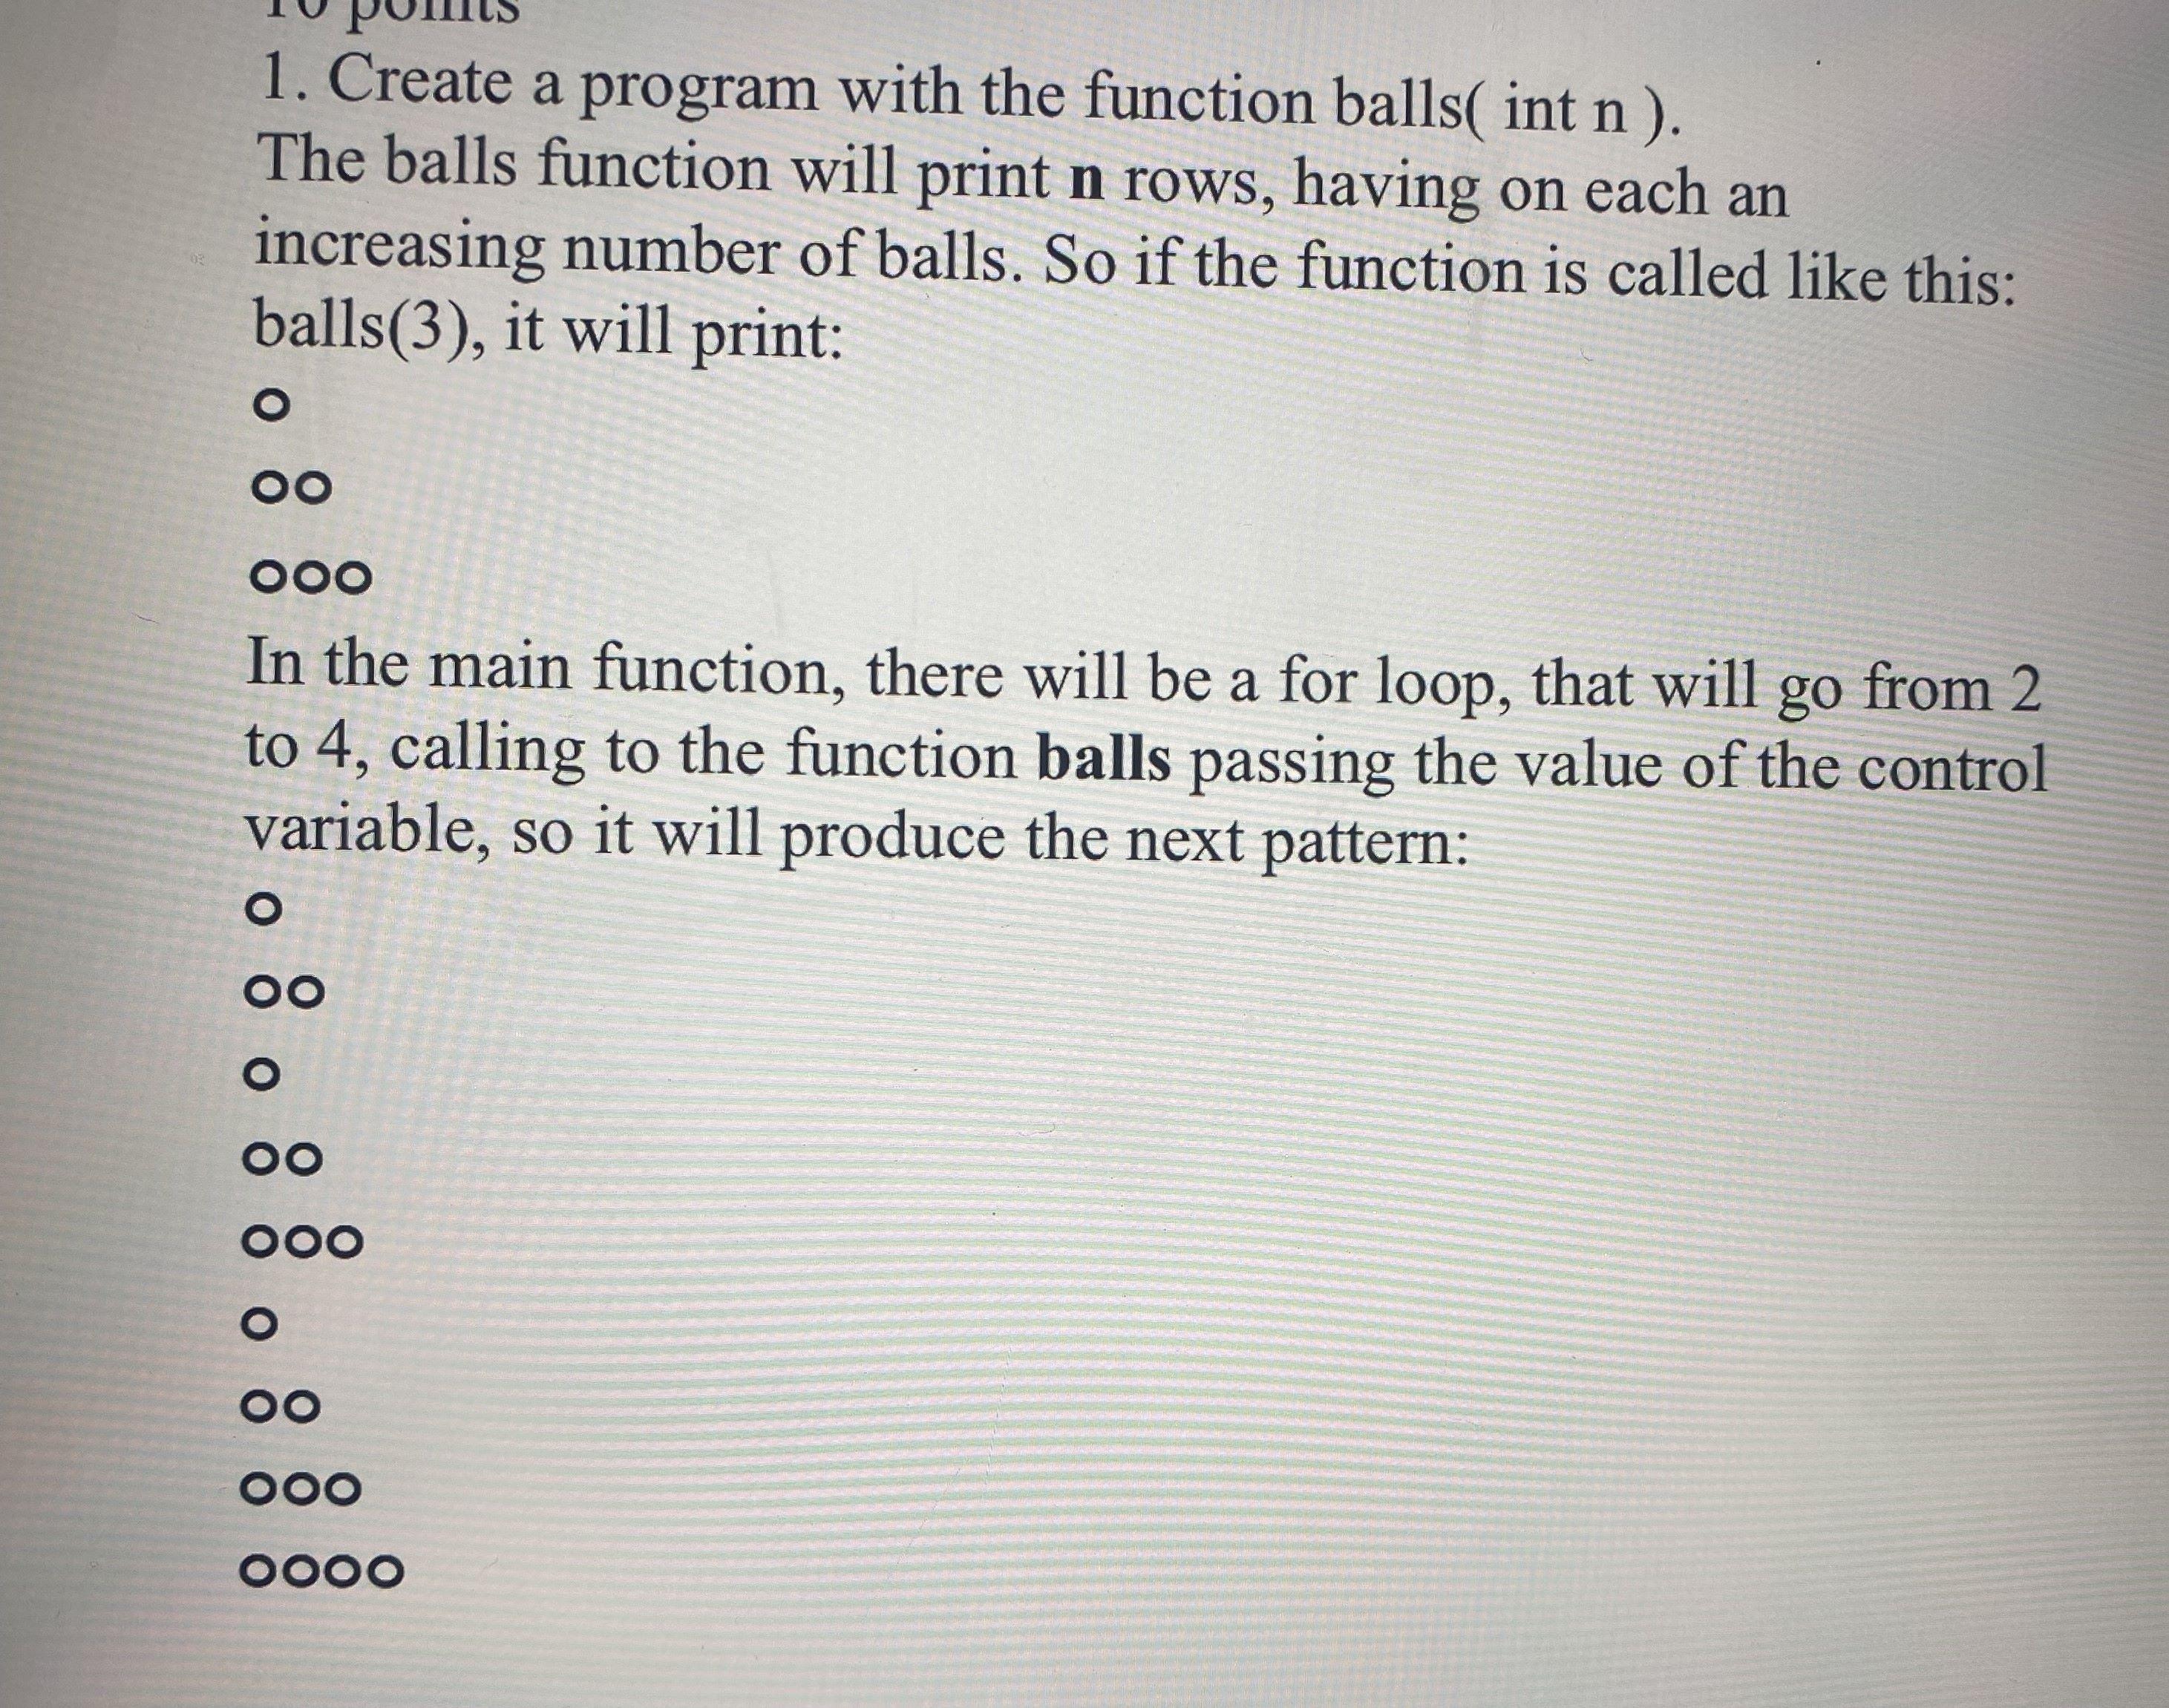 1. Create a program with the function balls(int n). The balls function will print n rows, having on each an